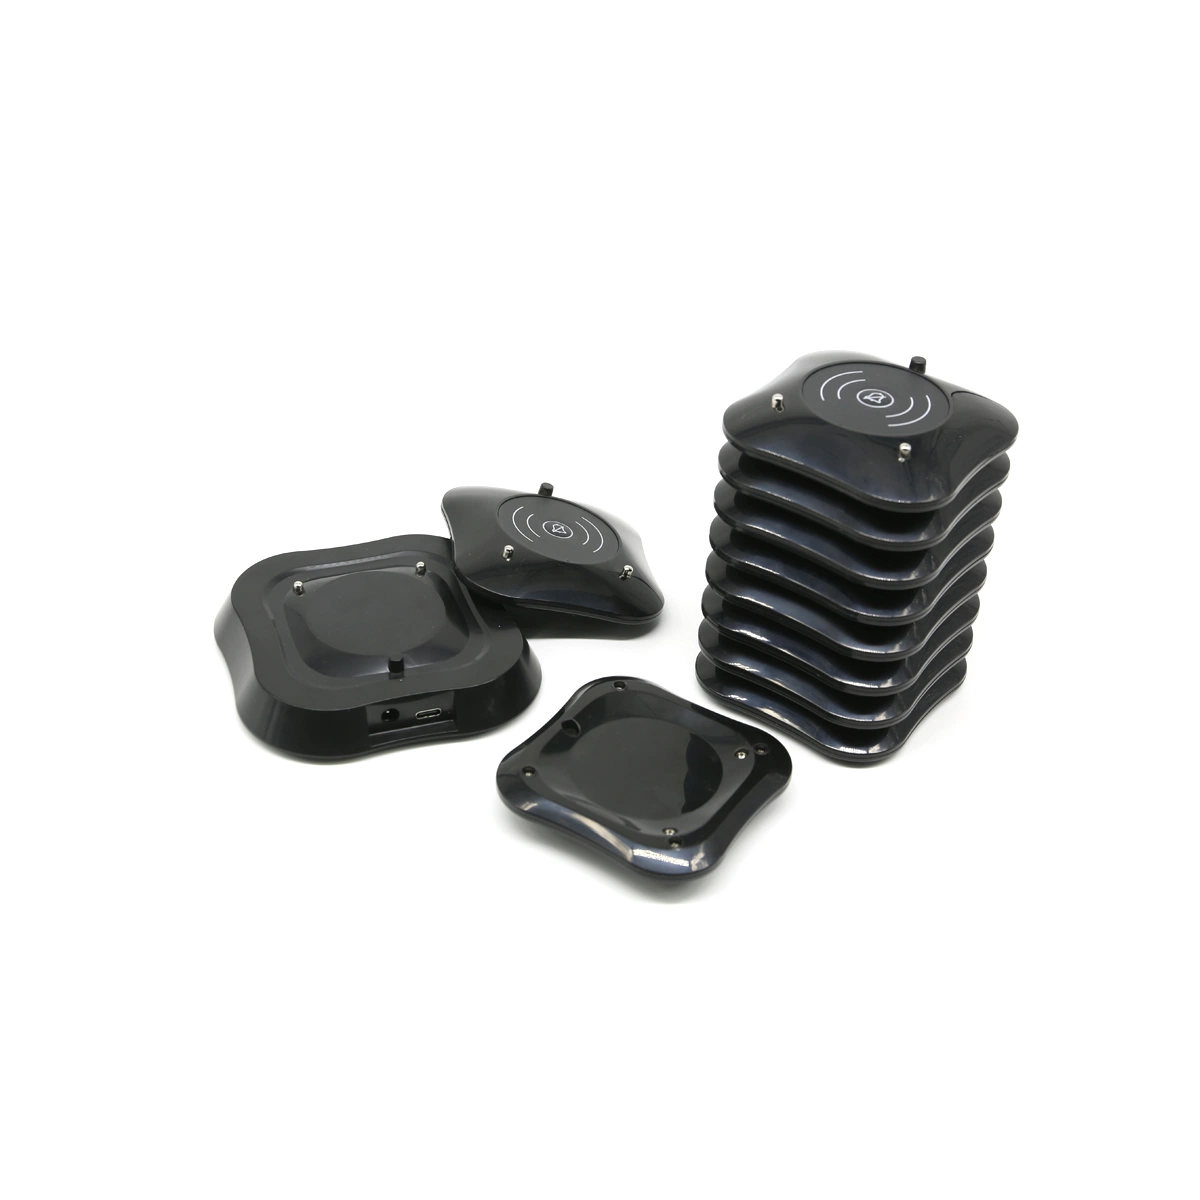 Wireless Restaurant Paging System for Guest Kl-QC08